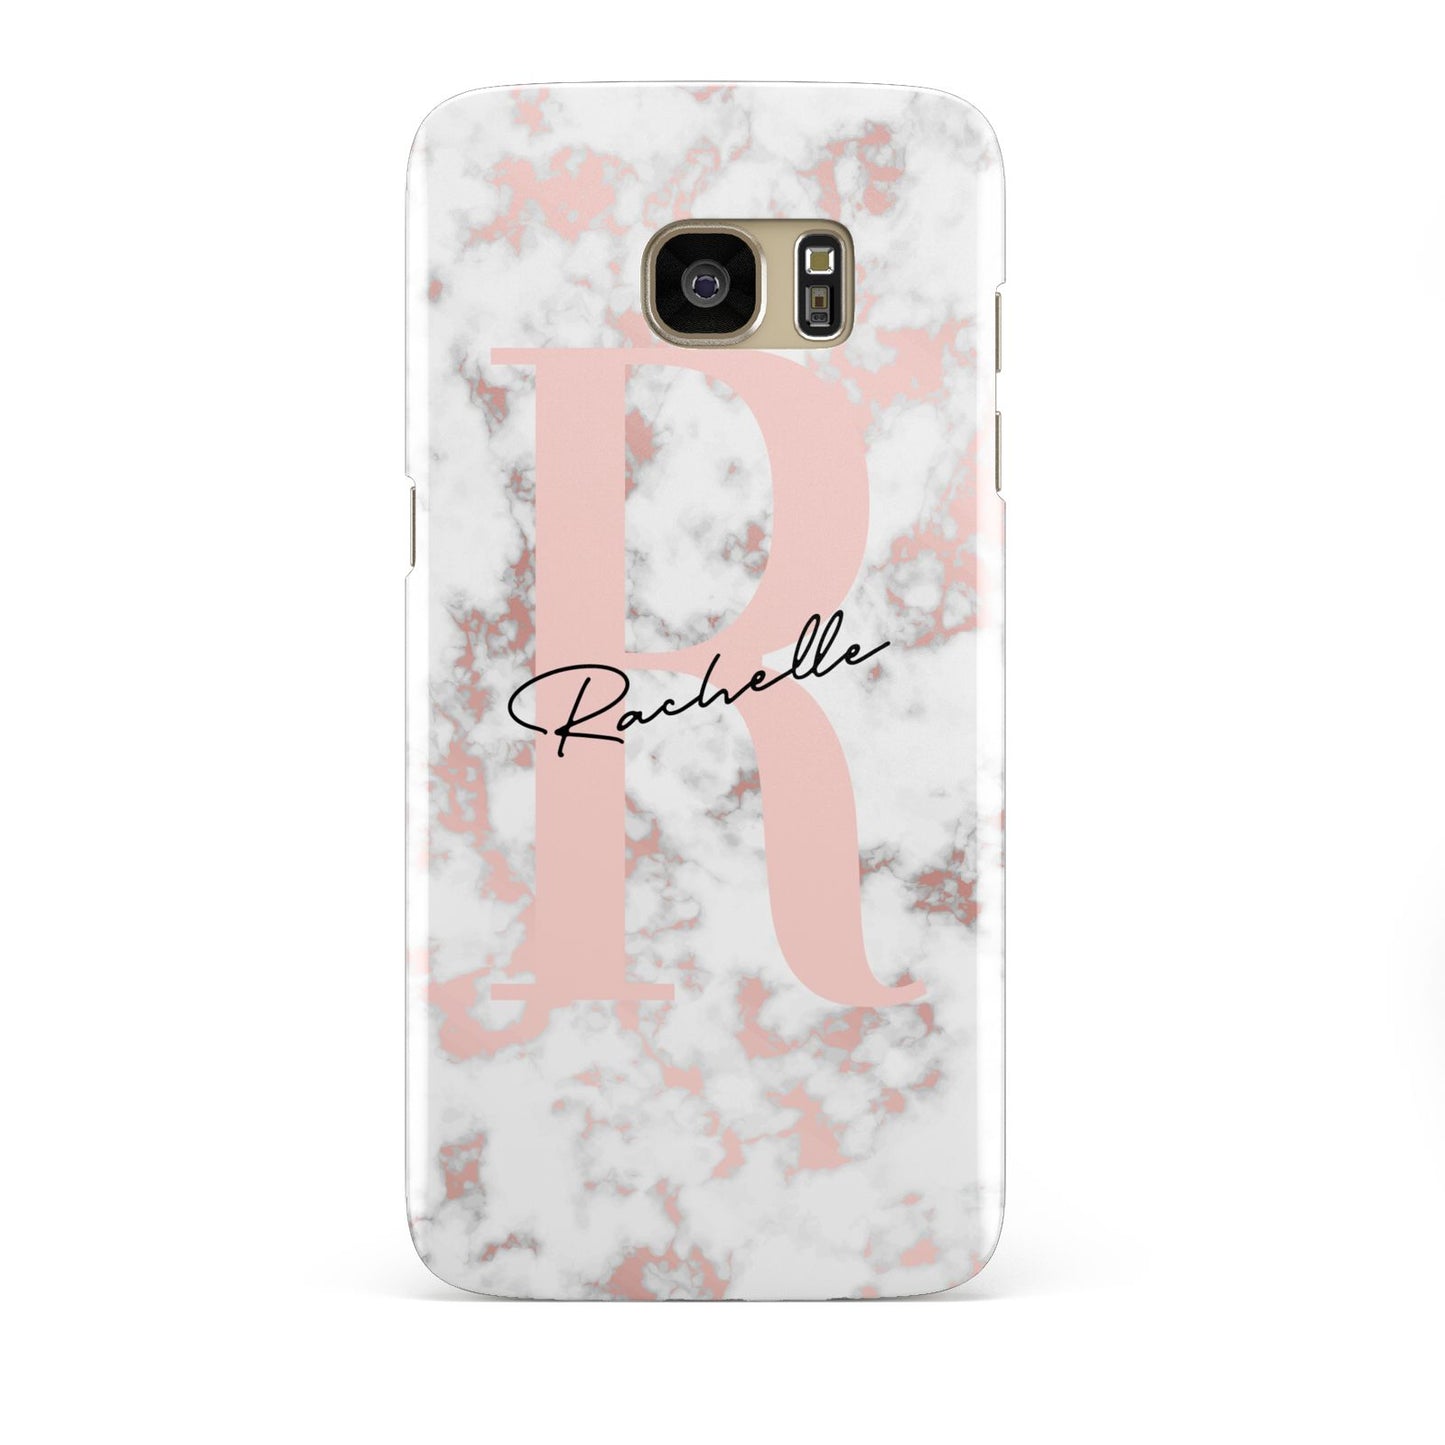 Monogrammed Rose Gold Marble Samsung Galaxy S7 Edge Case